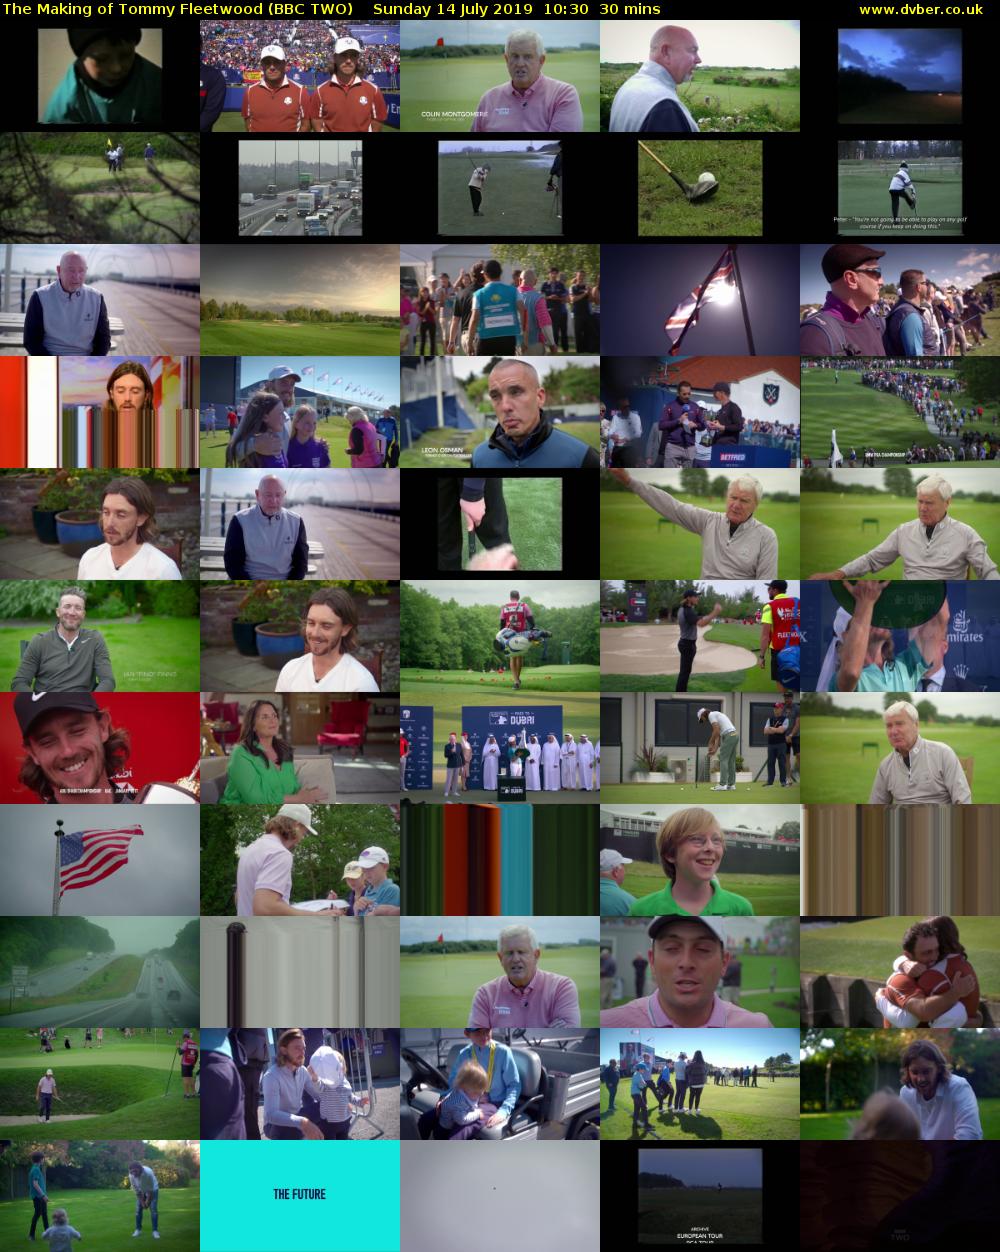 The Making of Tommy Fleetwood (BBC TWO) Sunday 14 July 2019 10:30 - 11:00